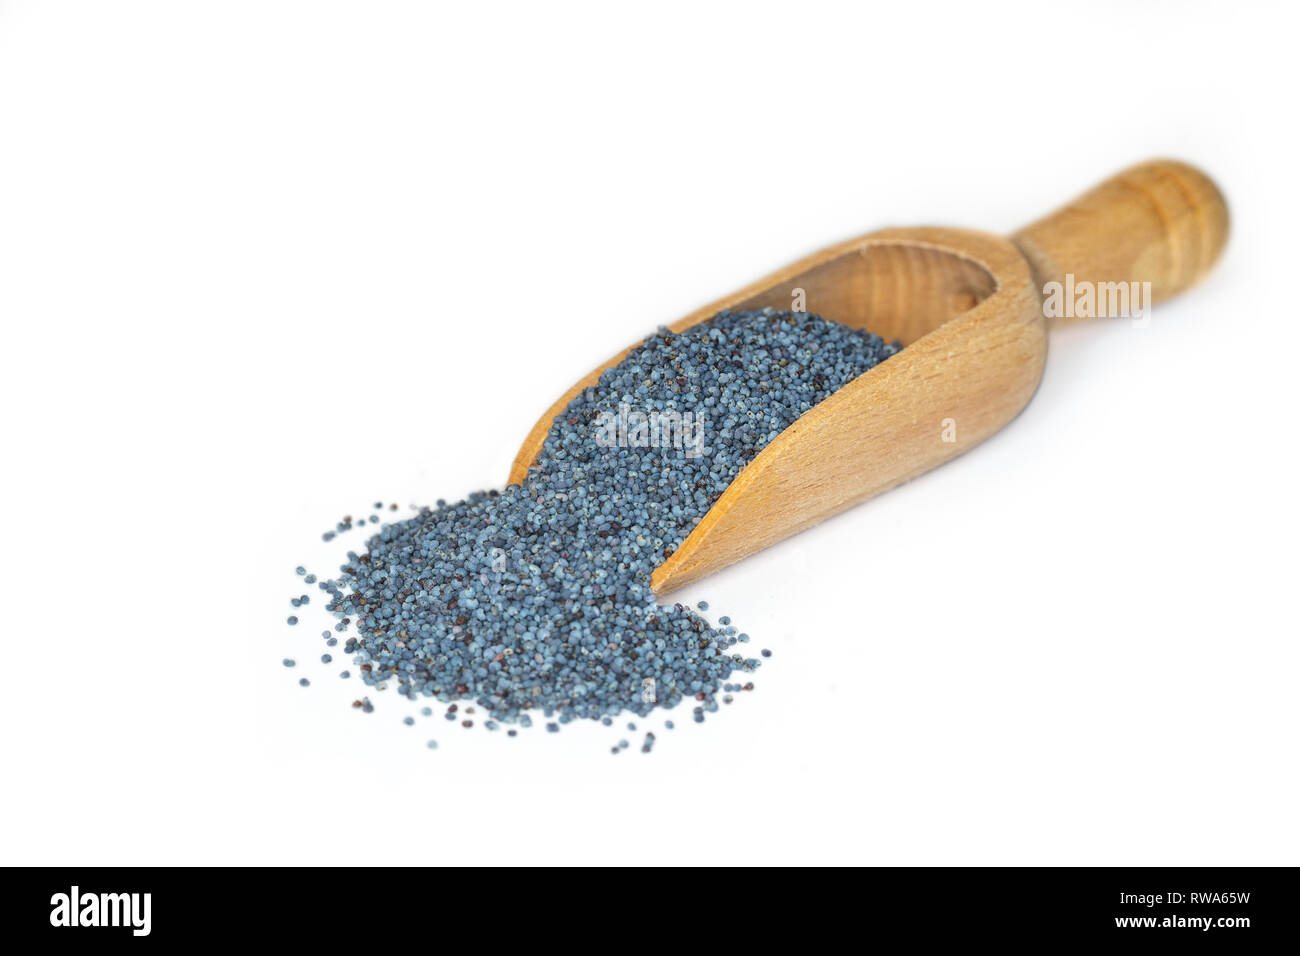 Closeup of blue poppy seeds, a plant based source of calcium, presented on a small wooden scoop Stock Photo